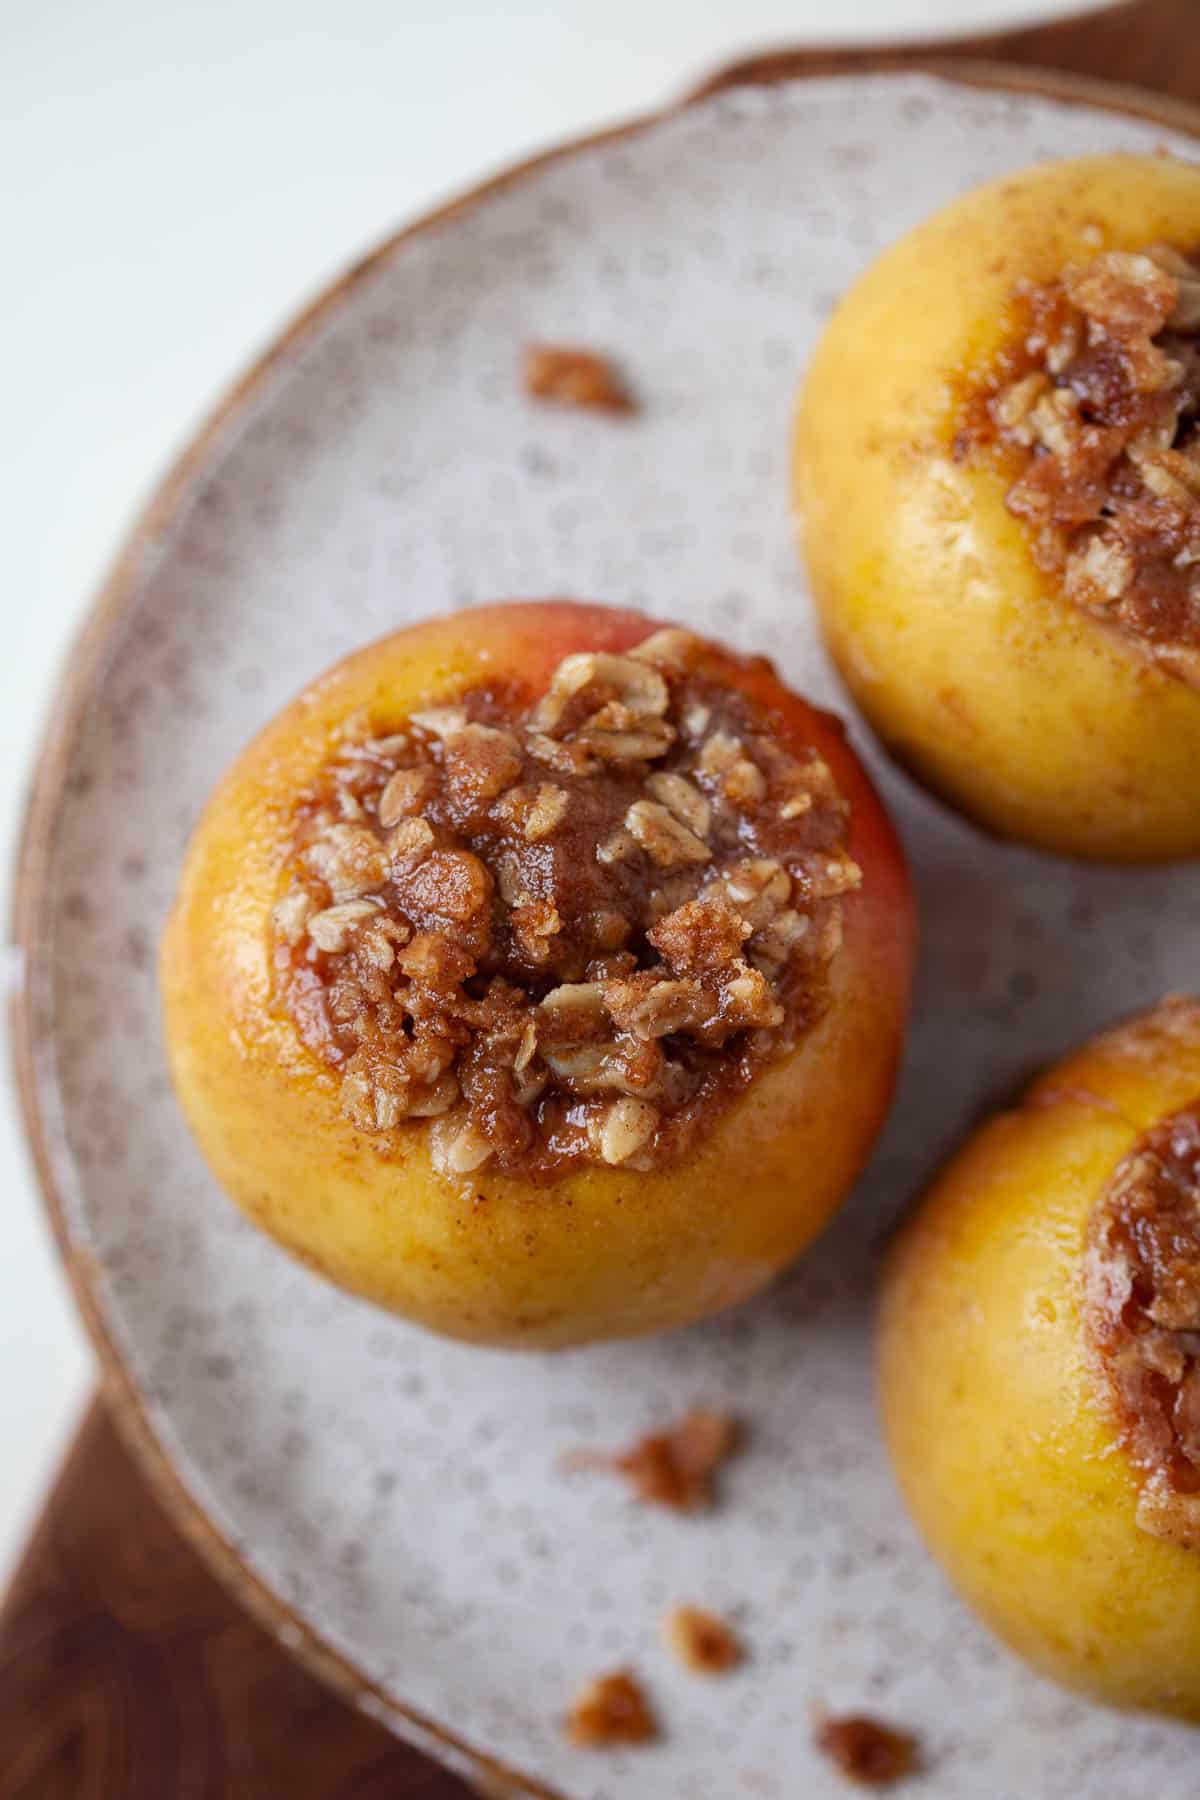 three baked apples with oat and cinnamon mixture in the center of the apples